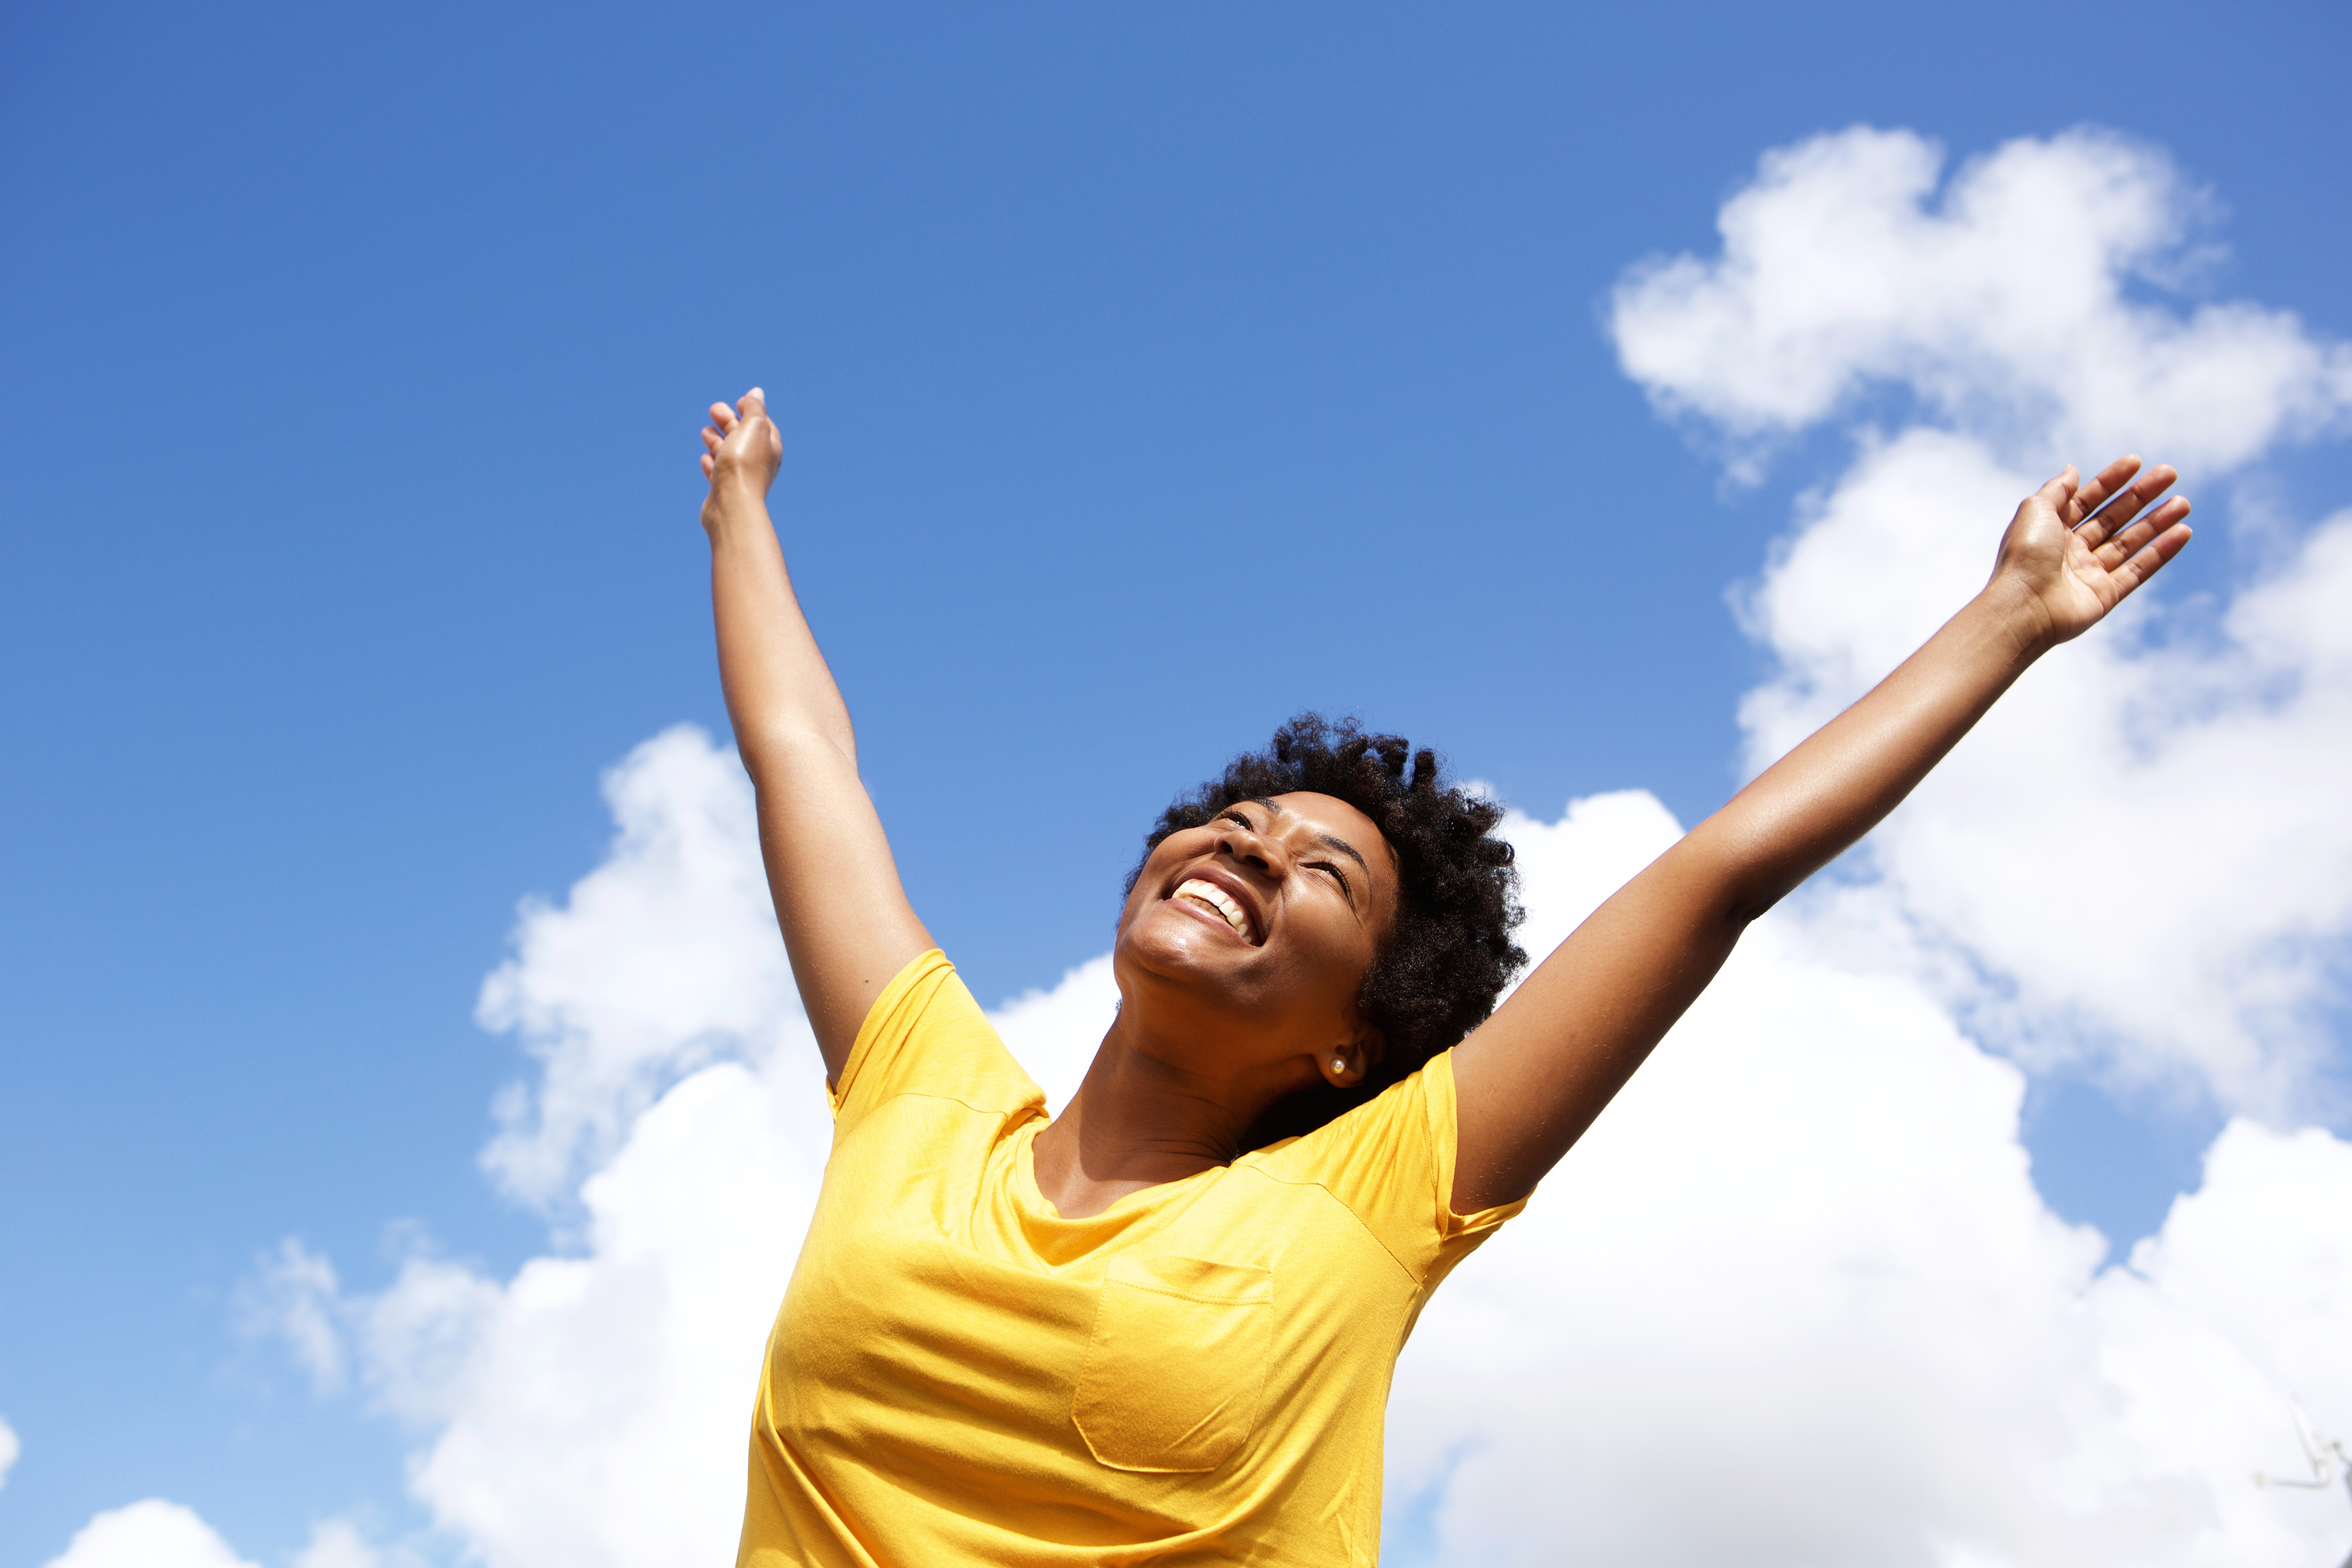 Portrait of cheerful young woman standing outside with her hands raised towards sky